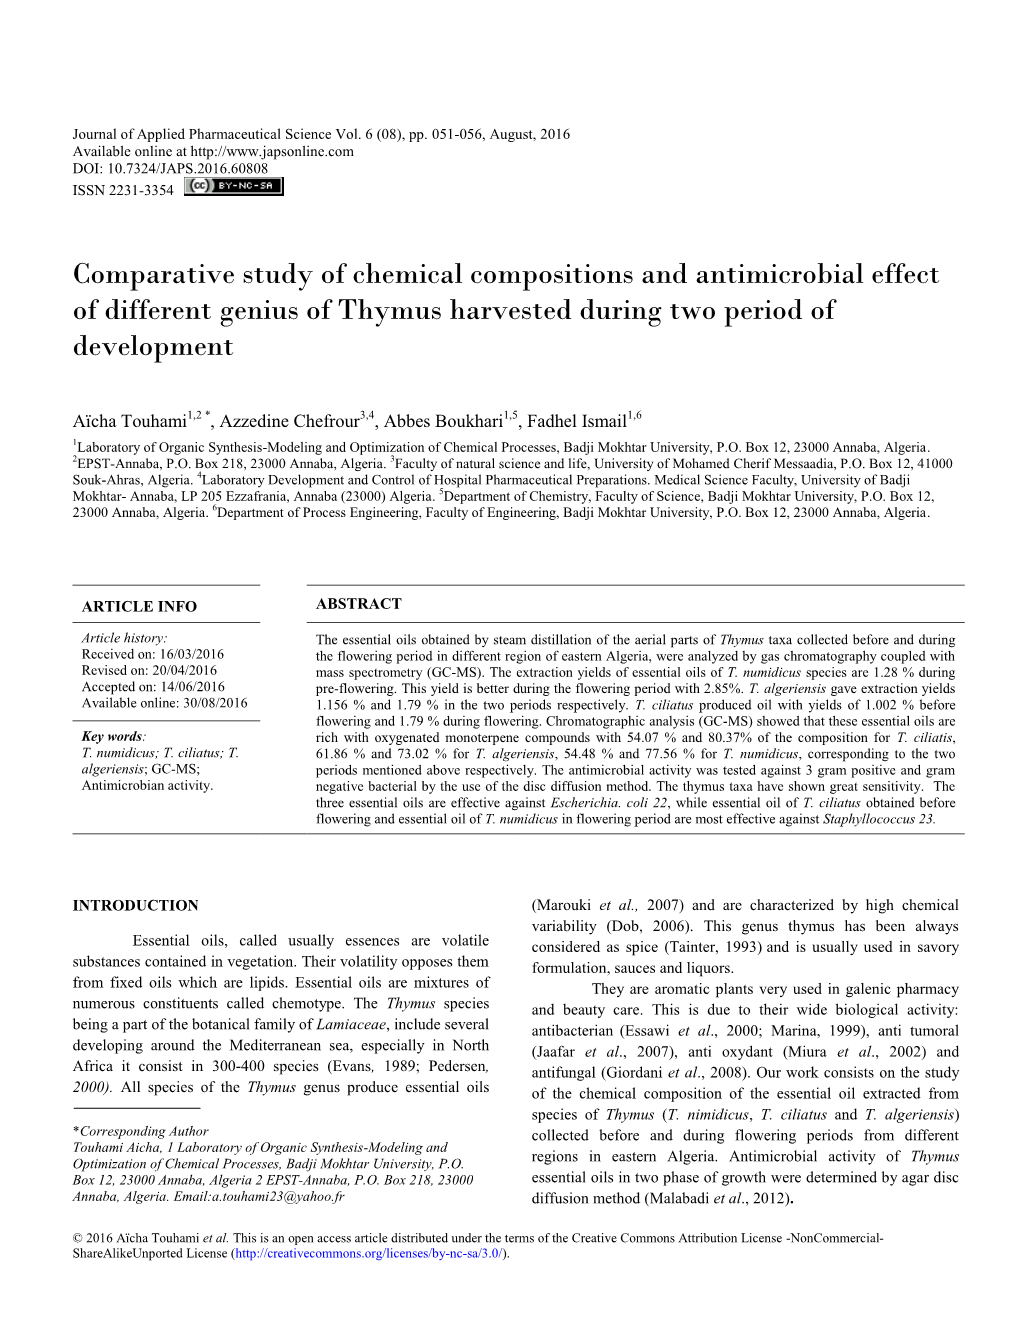 Comparative Study of Chemical Compositions and Antimicrobial Effect of Different Genius of Thymus Harvested During Two Period of Development